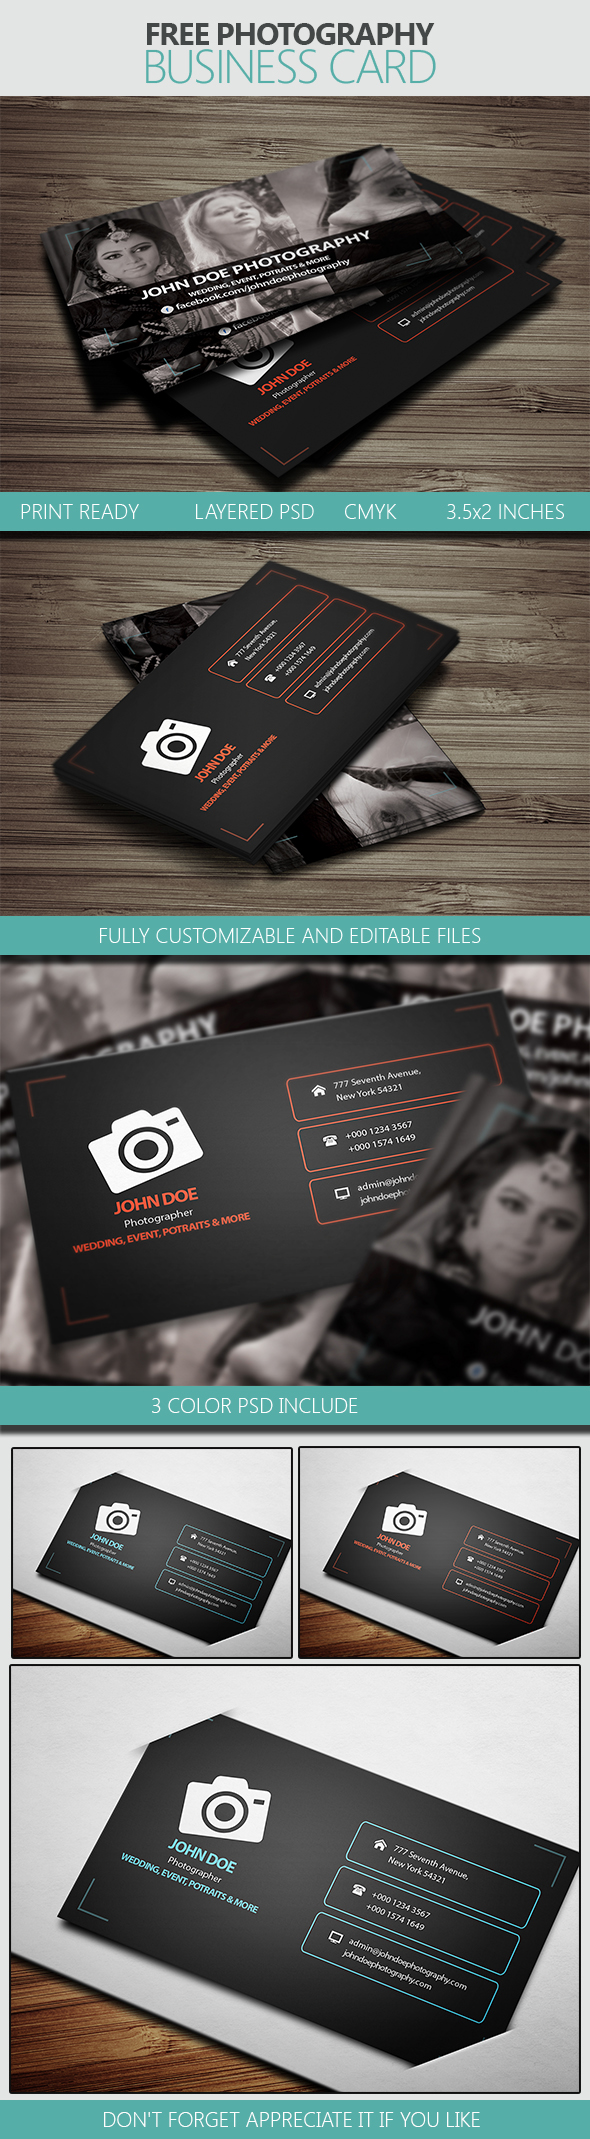 Free Photography Business Card Template PSD Download